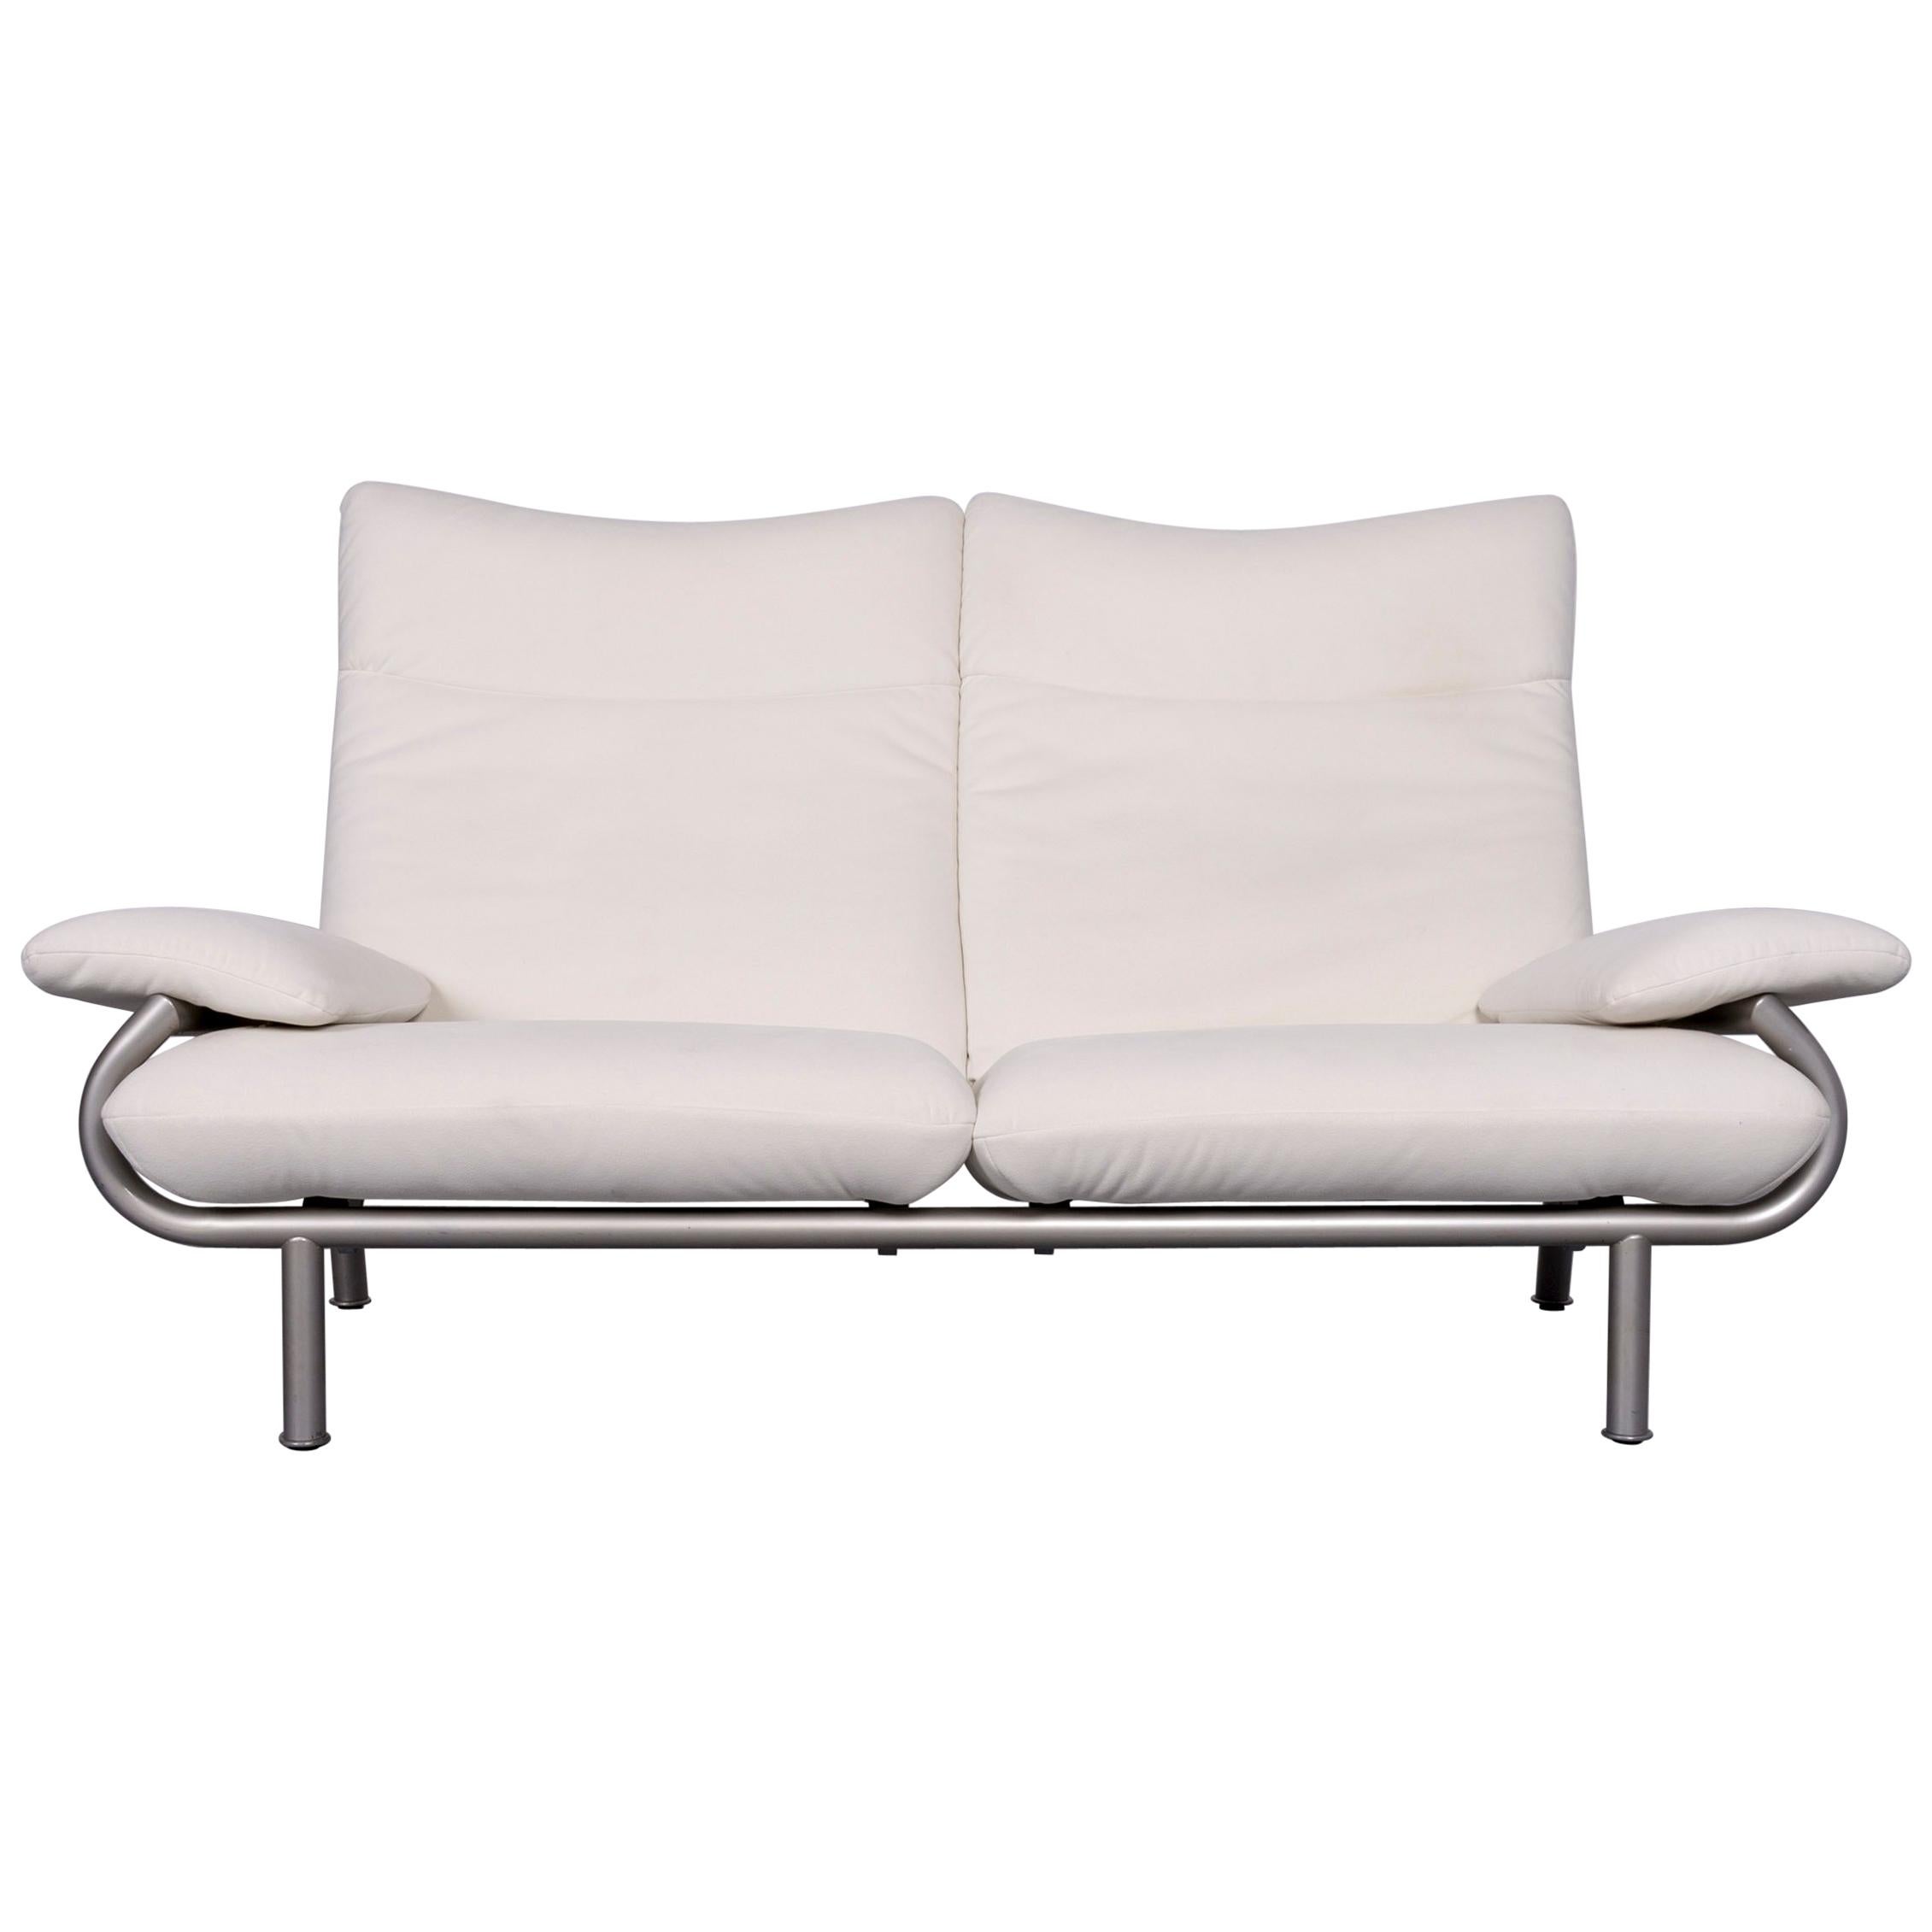 Laauser Designer Fabric Sofa White Two-Seat Couch For Sale